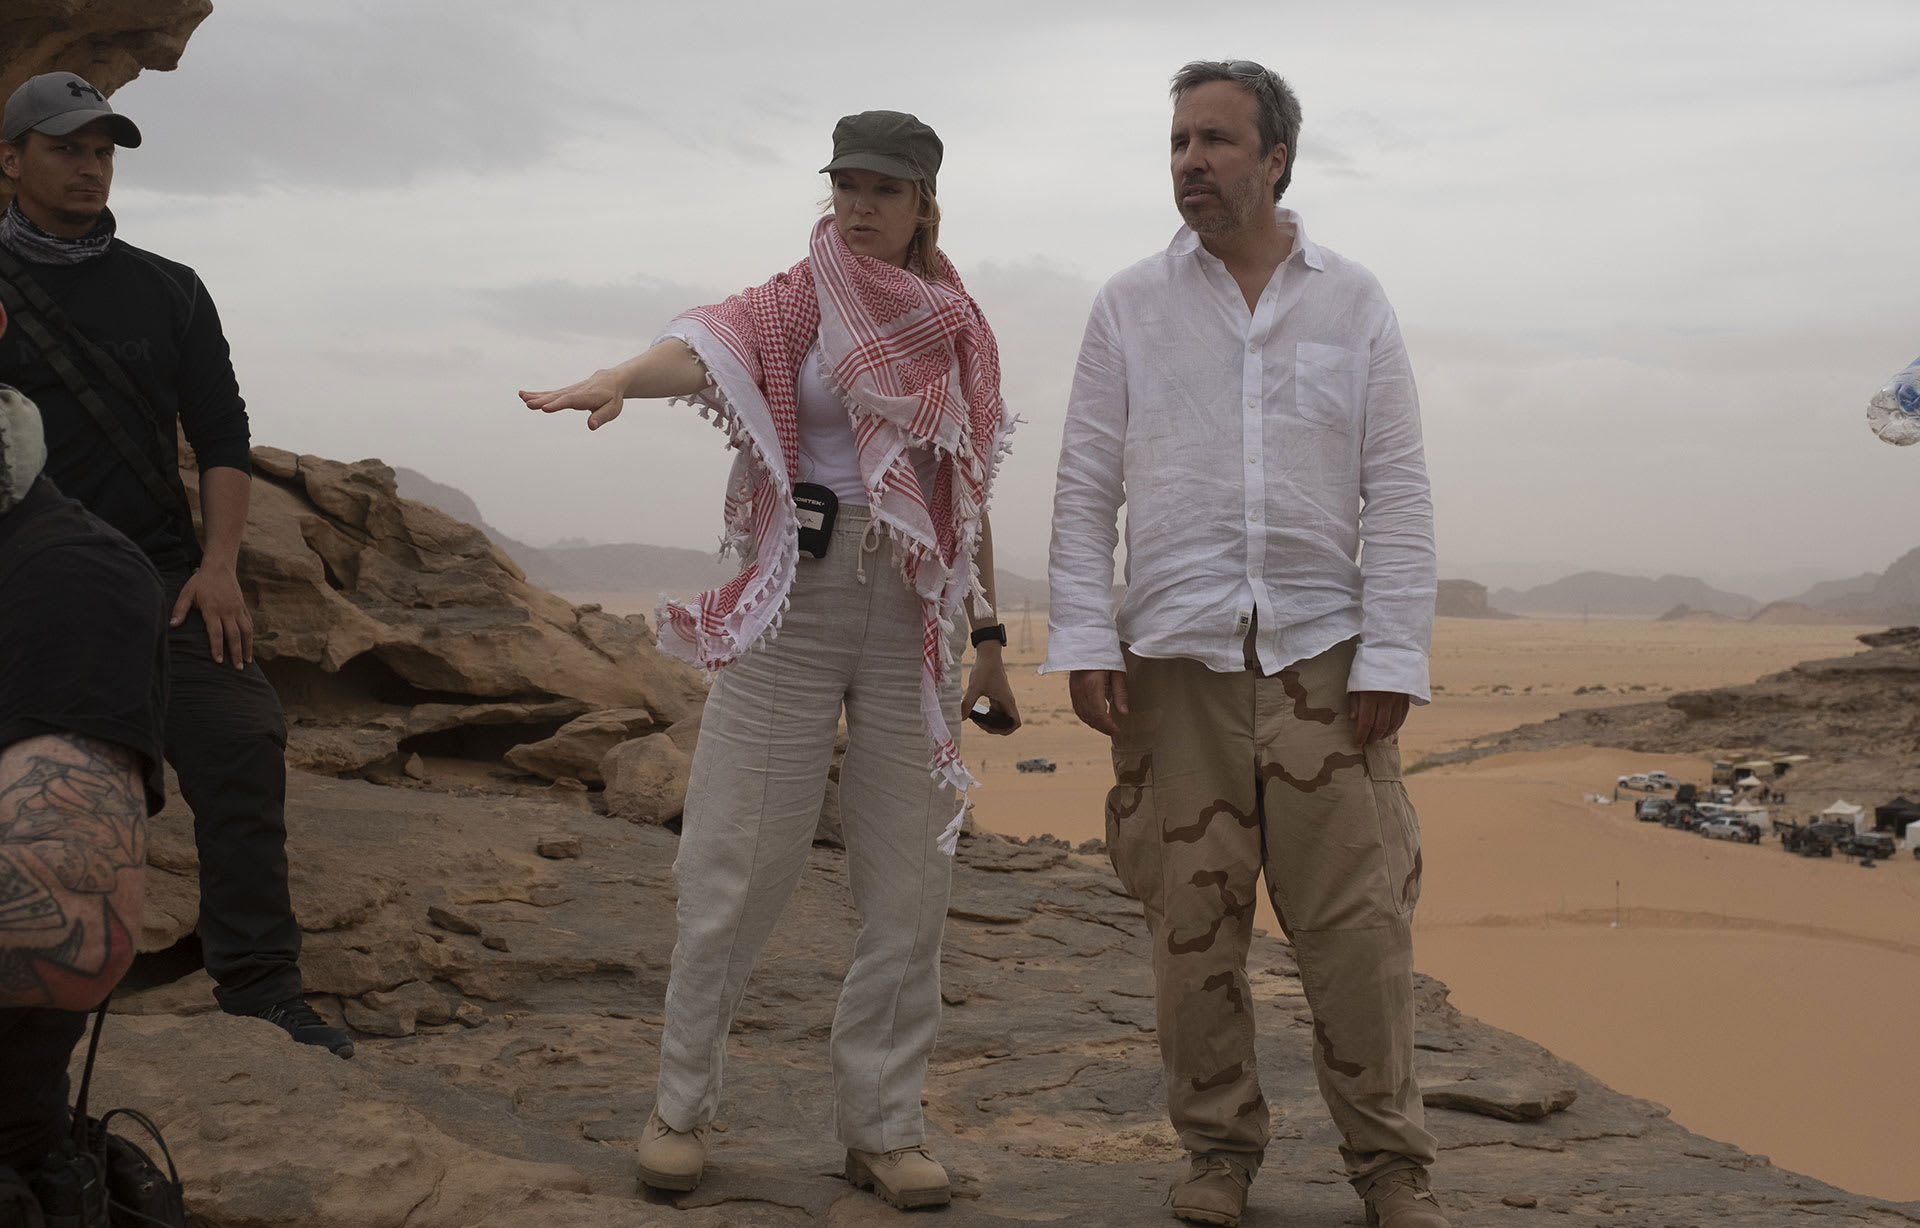 TANYA LAPOINTE and Director DENIS VILLENEUVE on the set of Dune